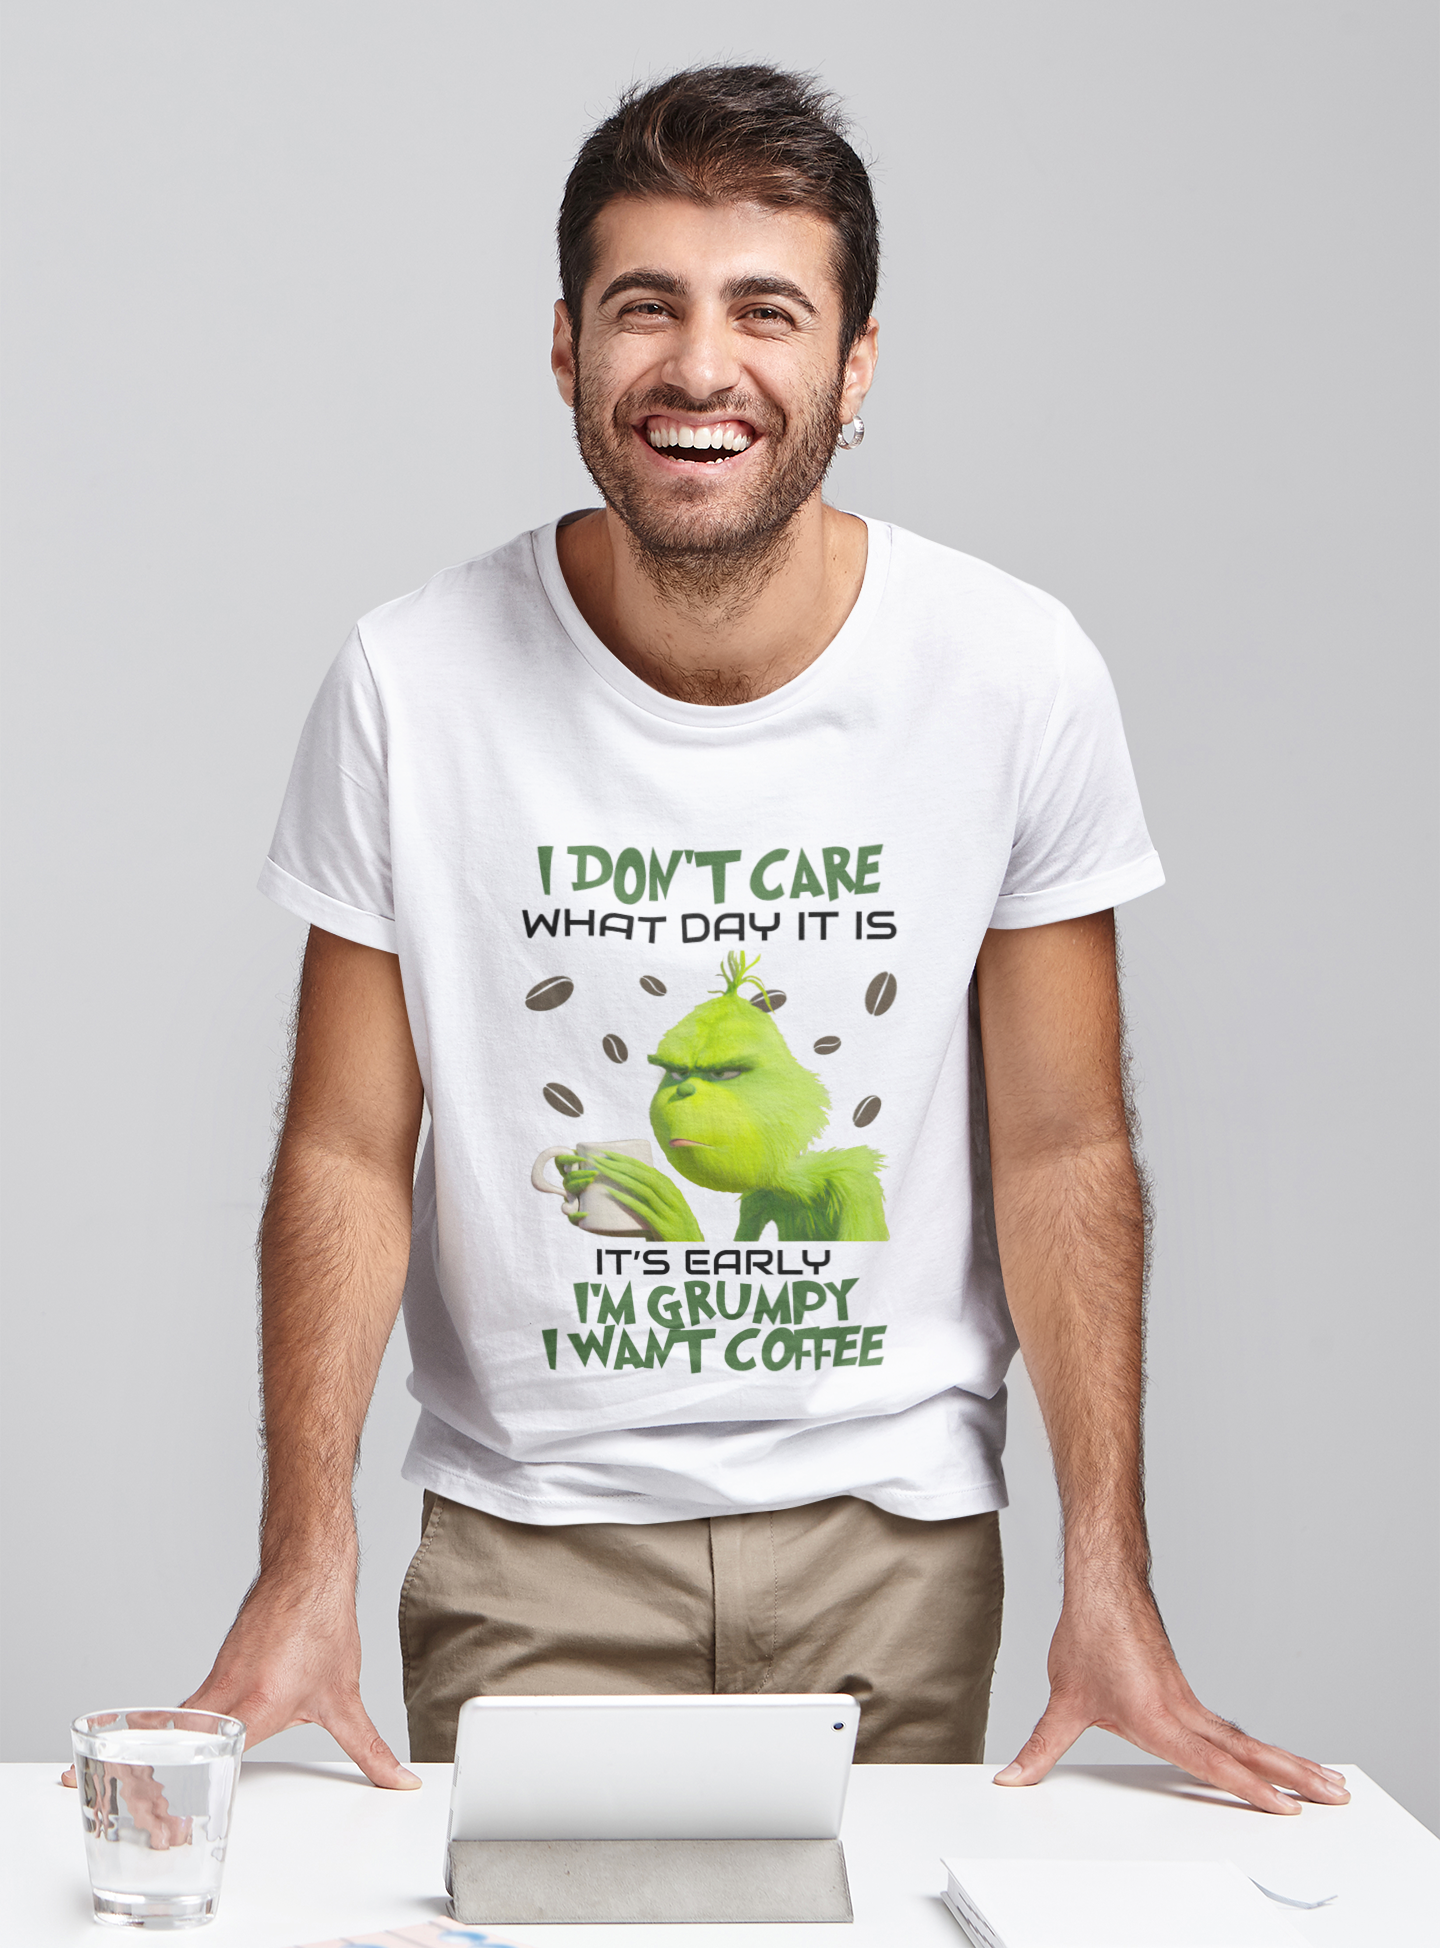 Grinch T Shirt, I Dont Care What Day It Is T Shirt, Its Early Im Grumpy I Want Coffee Tshirt, Christmas Gifts